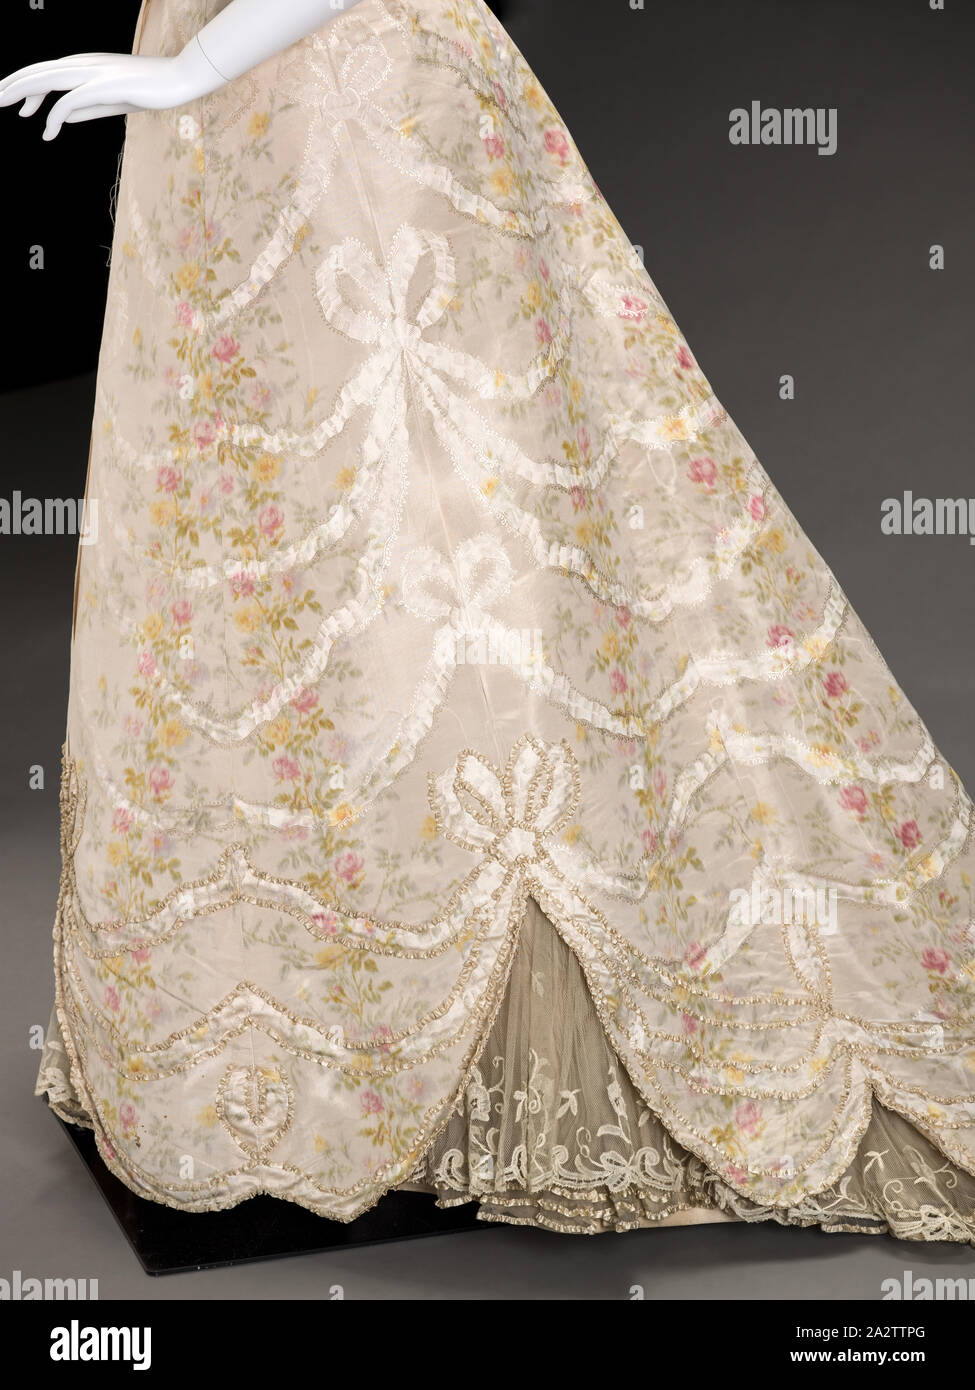 ball gown, G. and E. Spitzer, (Austrian), about 1900, silk, silk satin ribbons, cotton lace, L: 38 in., G. & E. Spitzer of Vienna, Textile and Fashion Arts Stock Photo